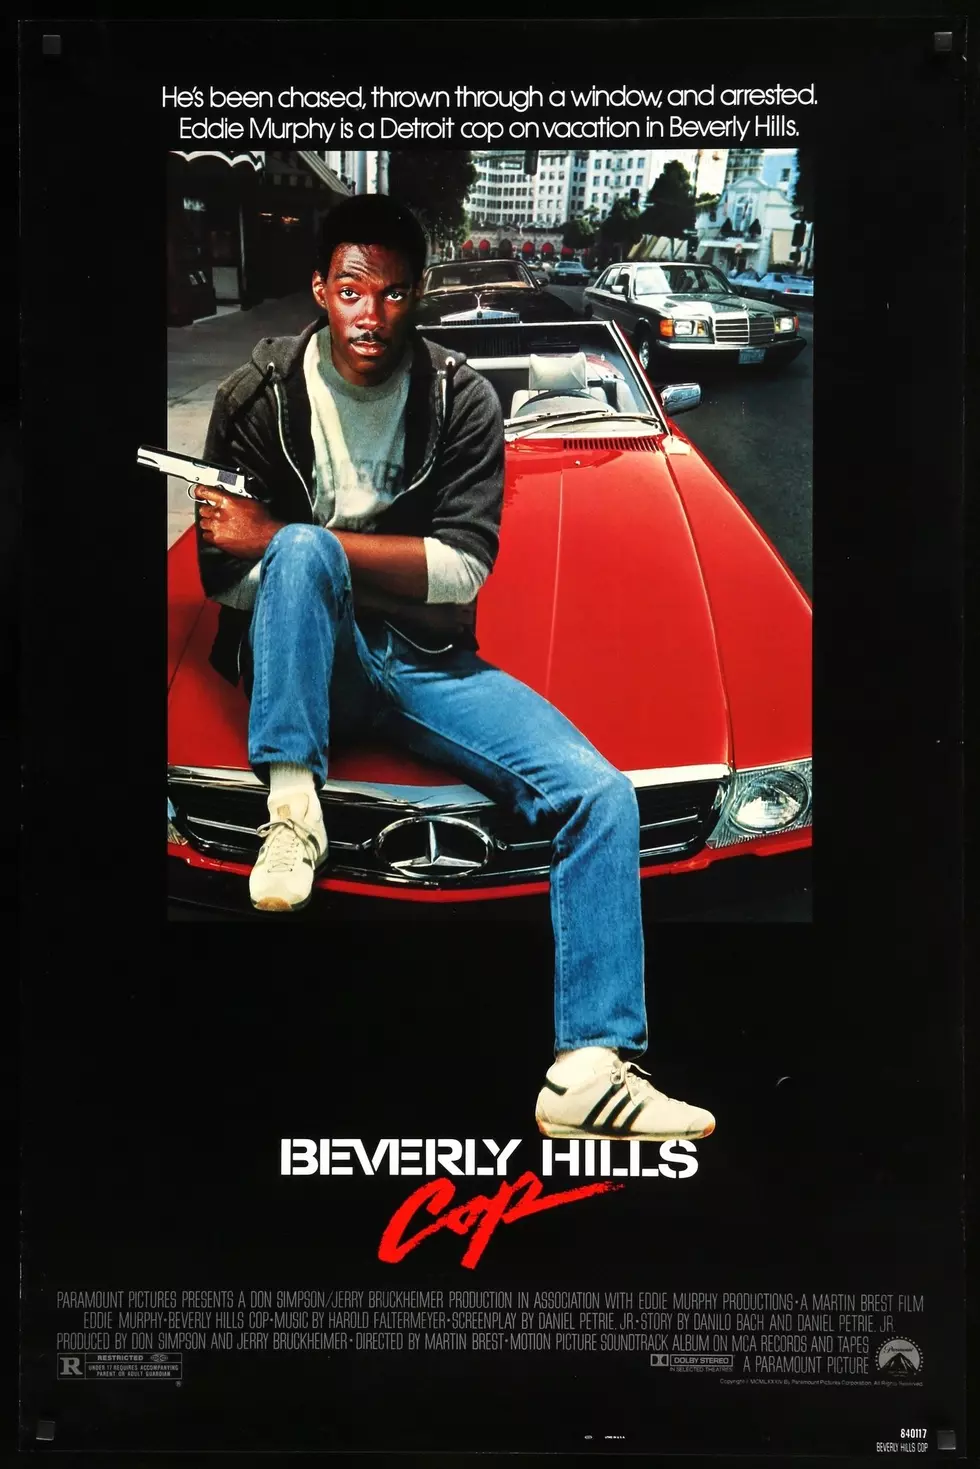 ‘Beverly Hills Cop’ was Released 35 Years Ago Today